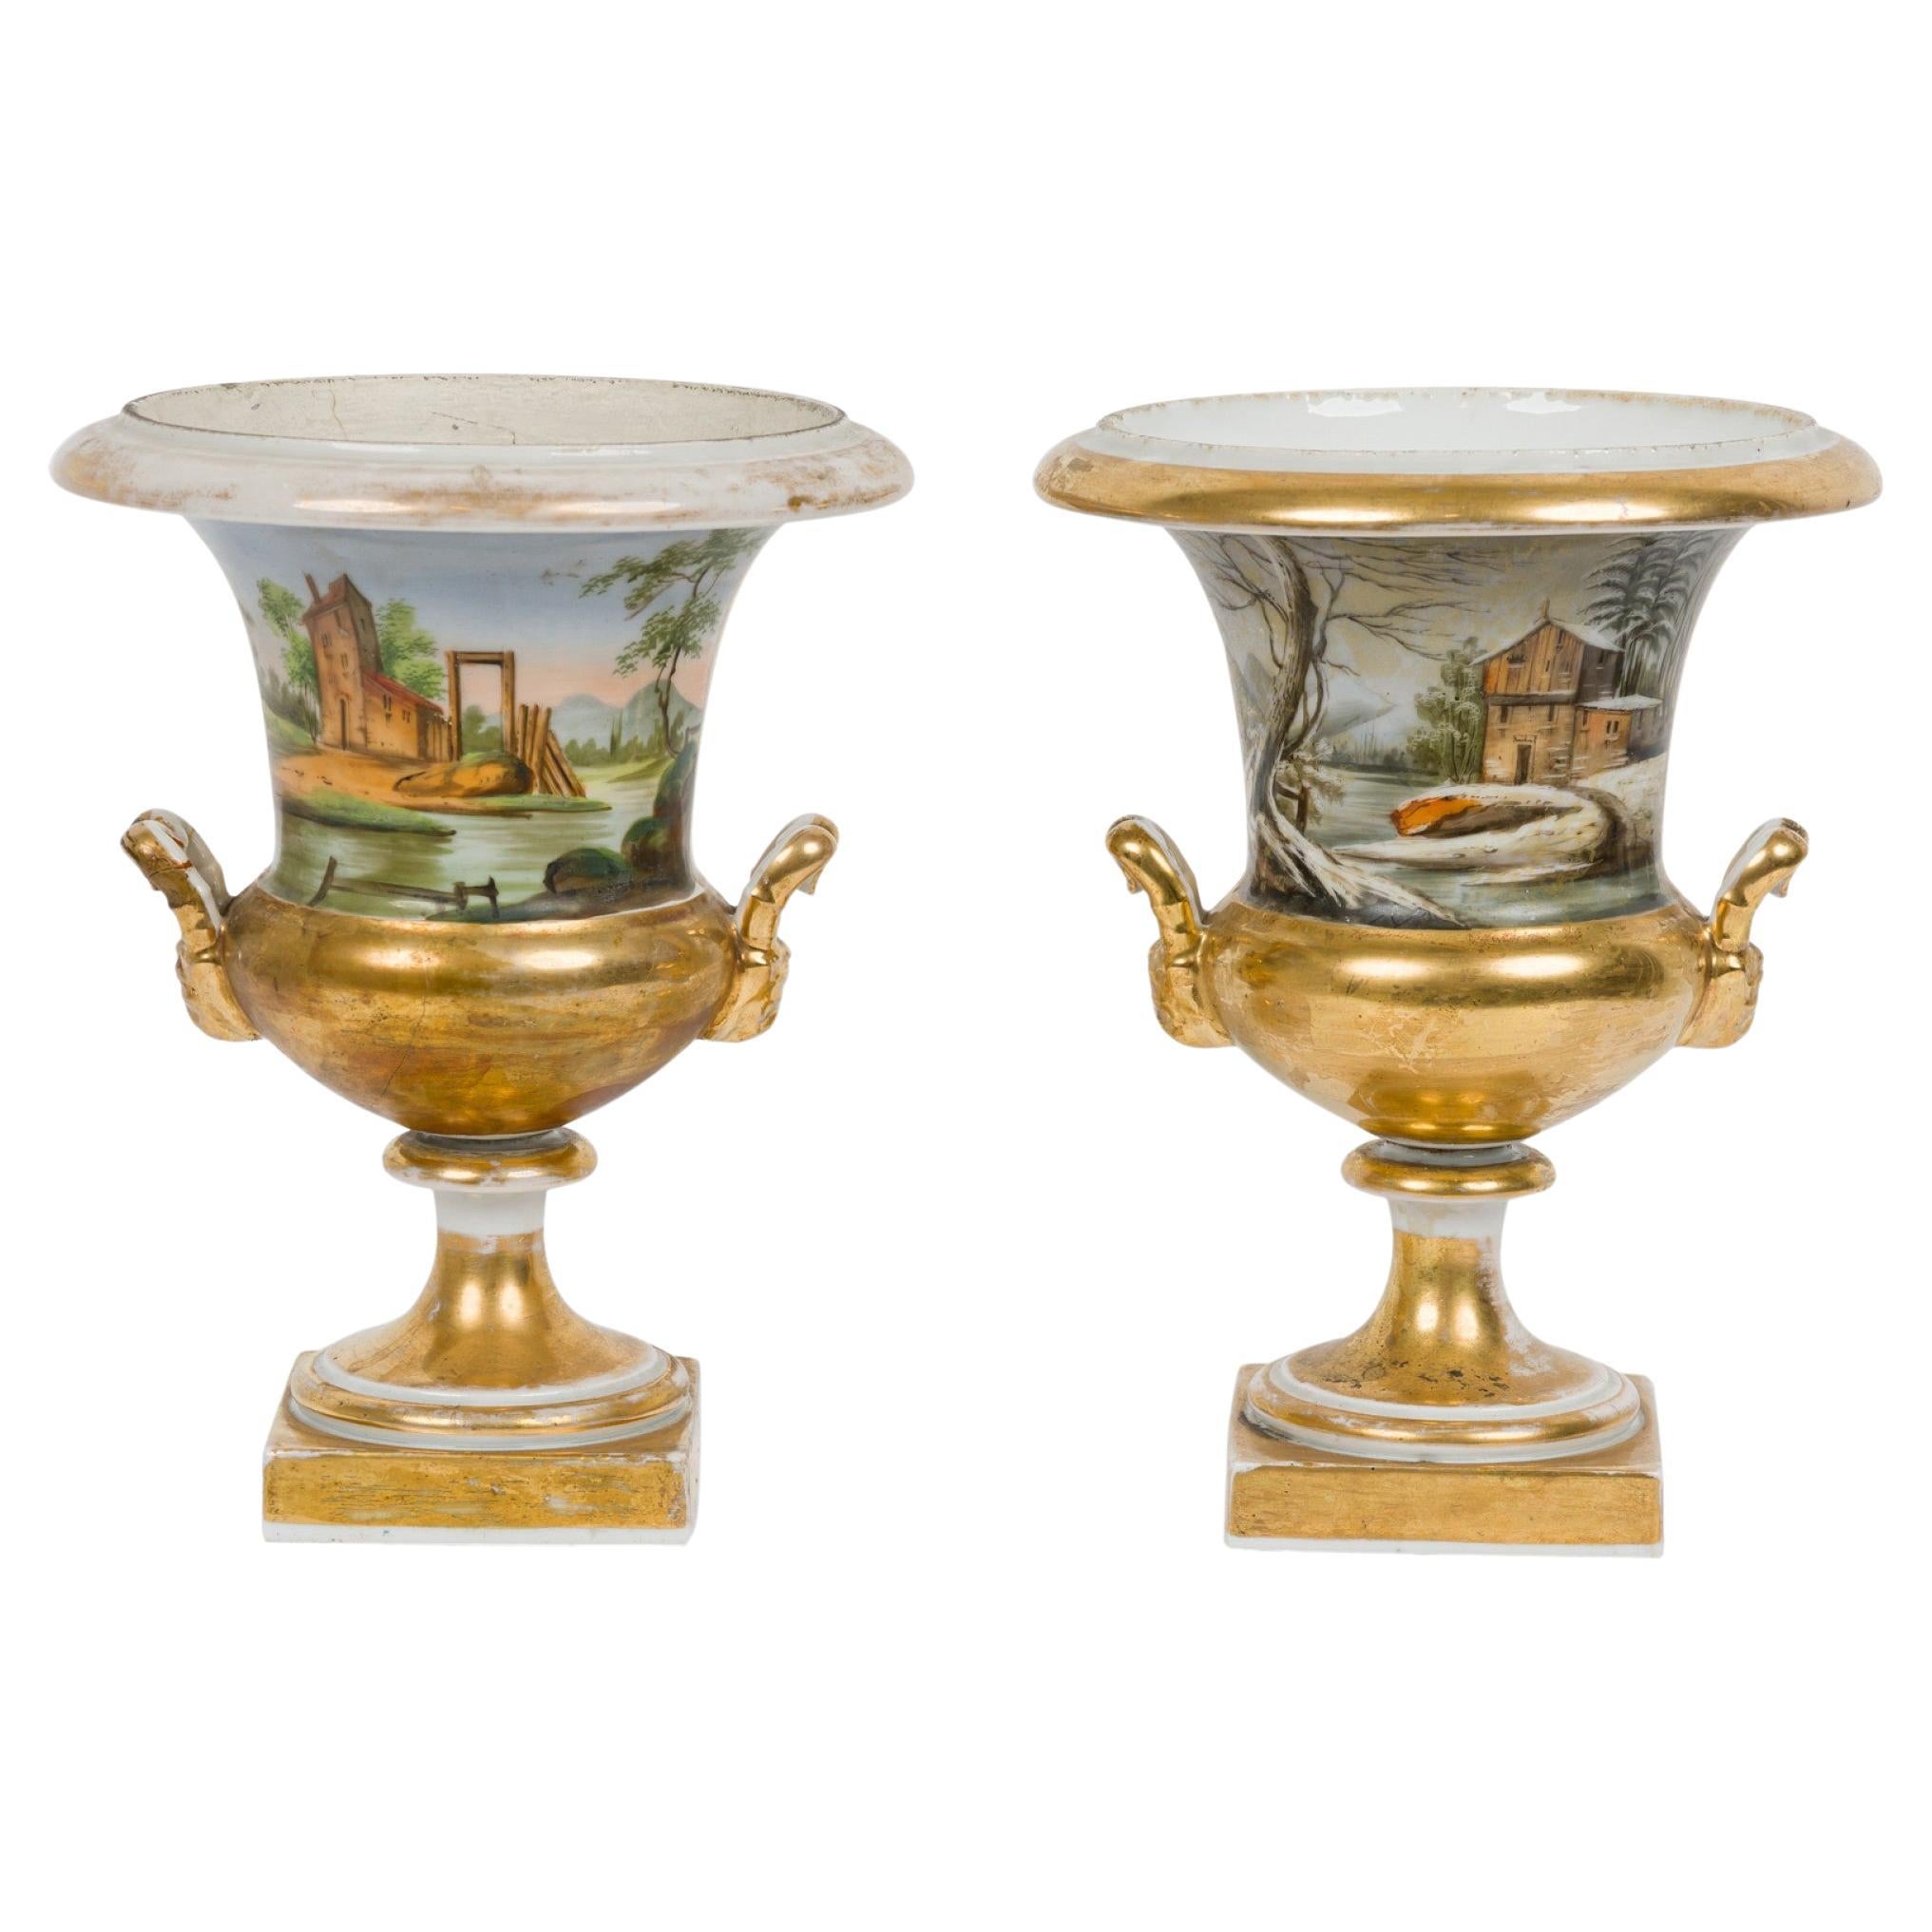 Pair of French Victorian Sevre Compagna Gilt and Painted Porcelain Urns For Sale